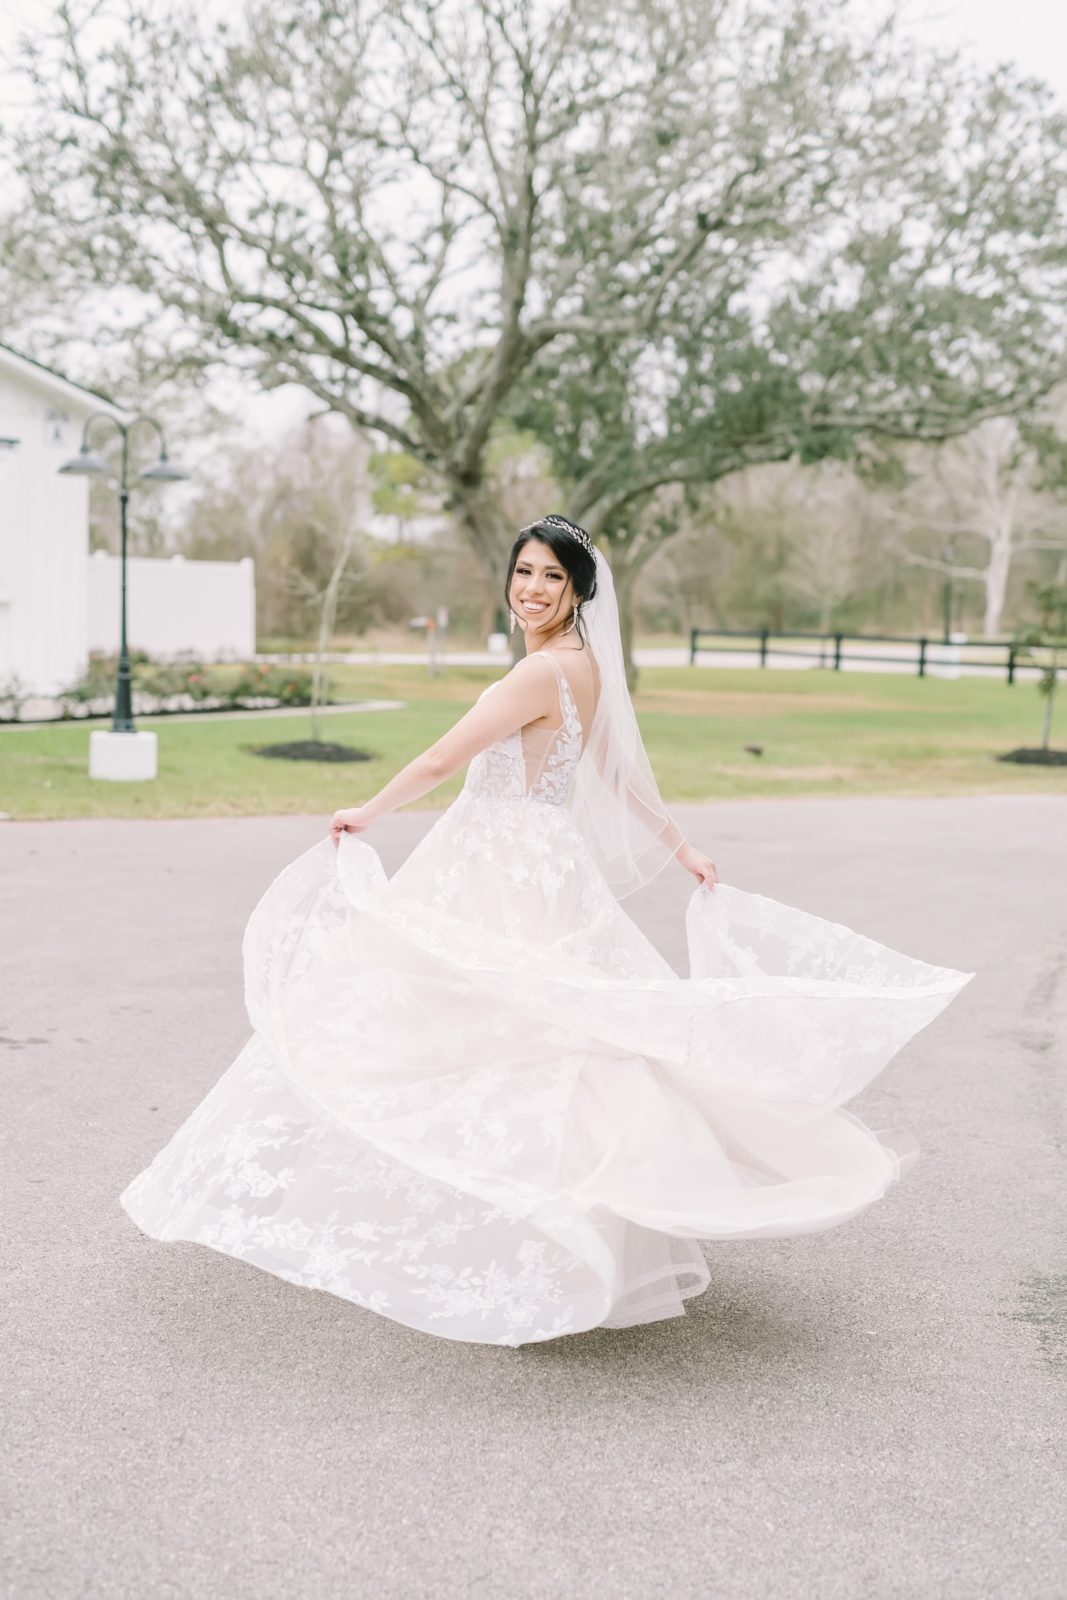 A bride twirls around in her dress in front of a farmhouse by Christina Elliott Photography. dancing bride dress twirl #ChristinaElliottPhotography #ChristinaElliottBridals #Houstonweddings #Farmhousewedding #TheSpringsVenue #BridalsHouston